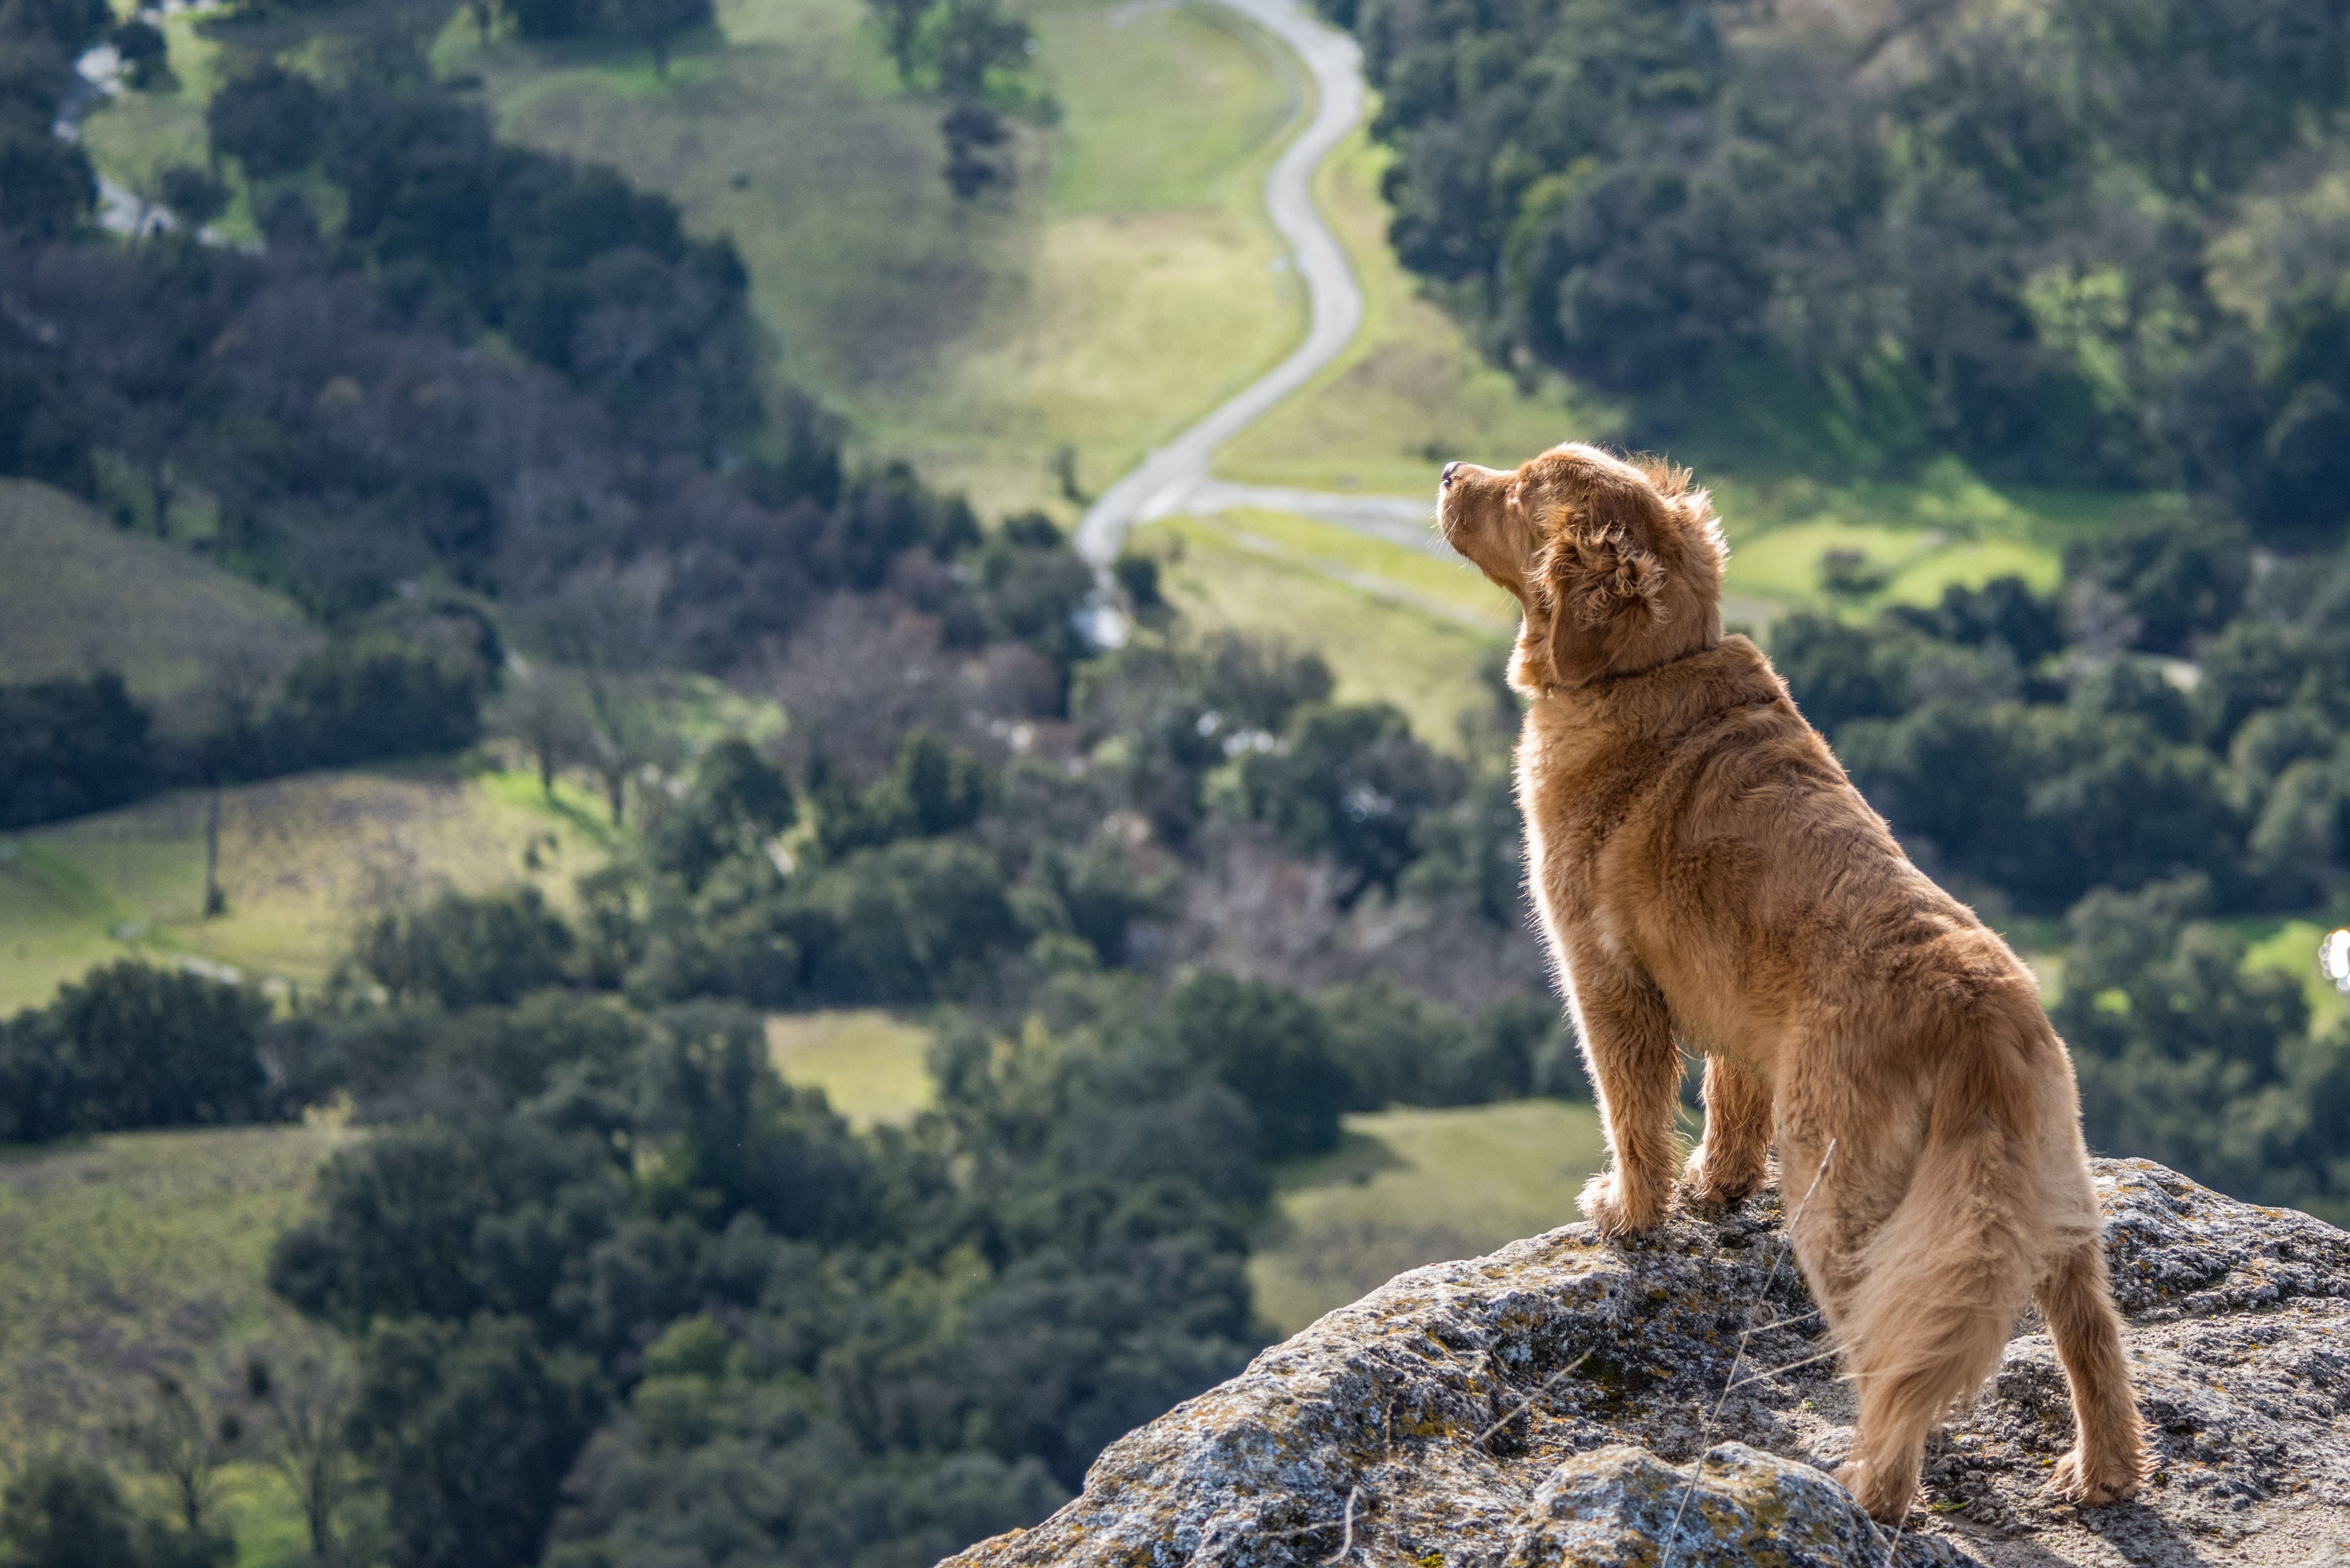 A photo of a dog overlooking a wooded area.